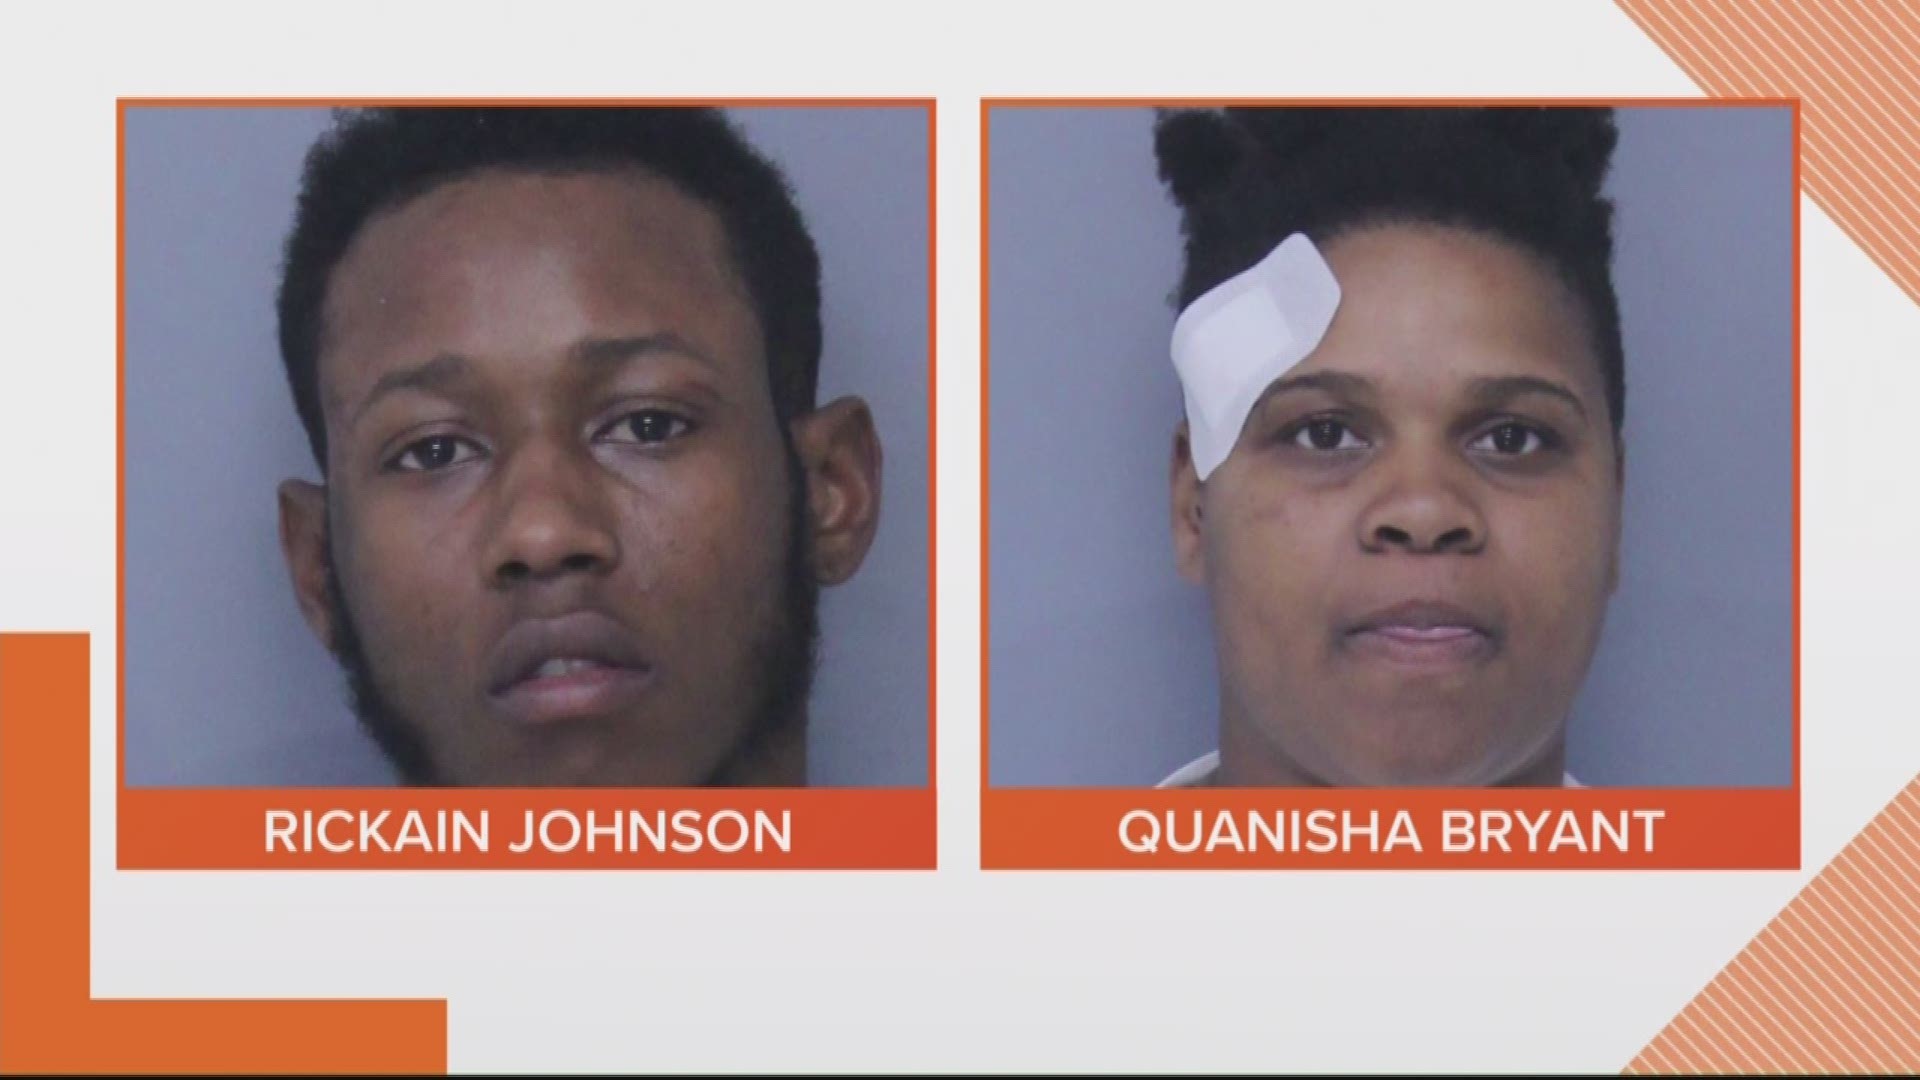 Police identified Quanisha Bryant, 22, and Rickain Johnson, 23, as the suspects who started the incident which started at Anytime Fitness located at 4010 US-1.